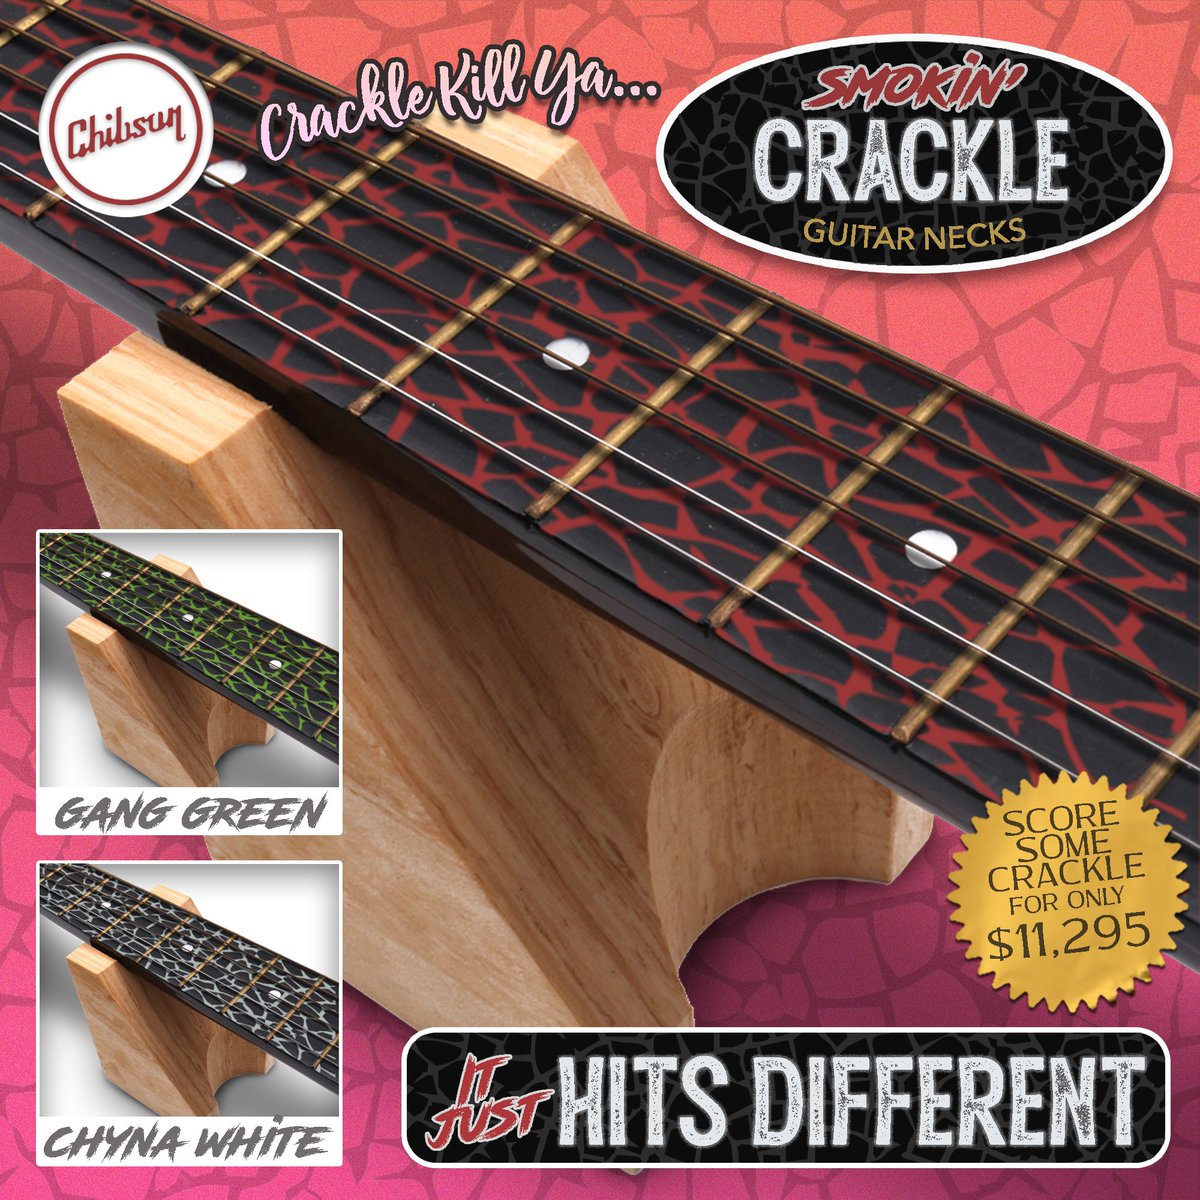 Say Yes To Crackle 

#chibson #chib #chibs #chibi #crackle #finish #guitarneck #gear #guitarist #guitarplayer #onlyachibsonisgoodenough